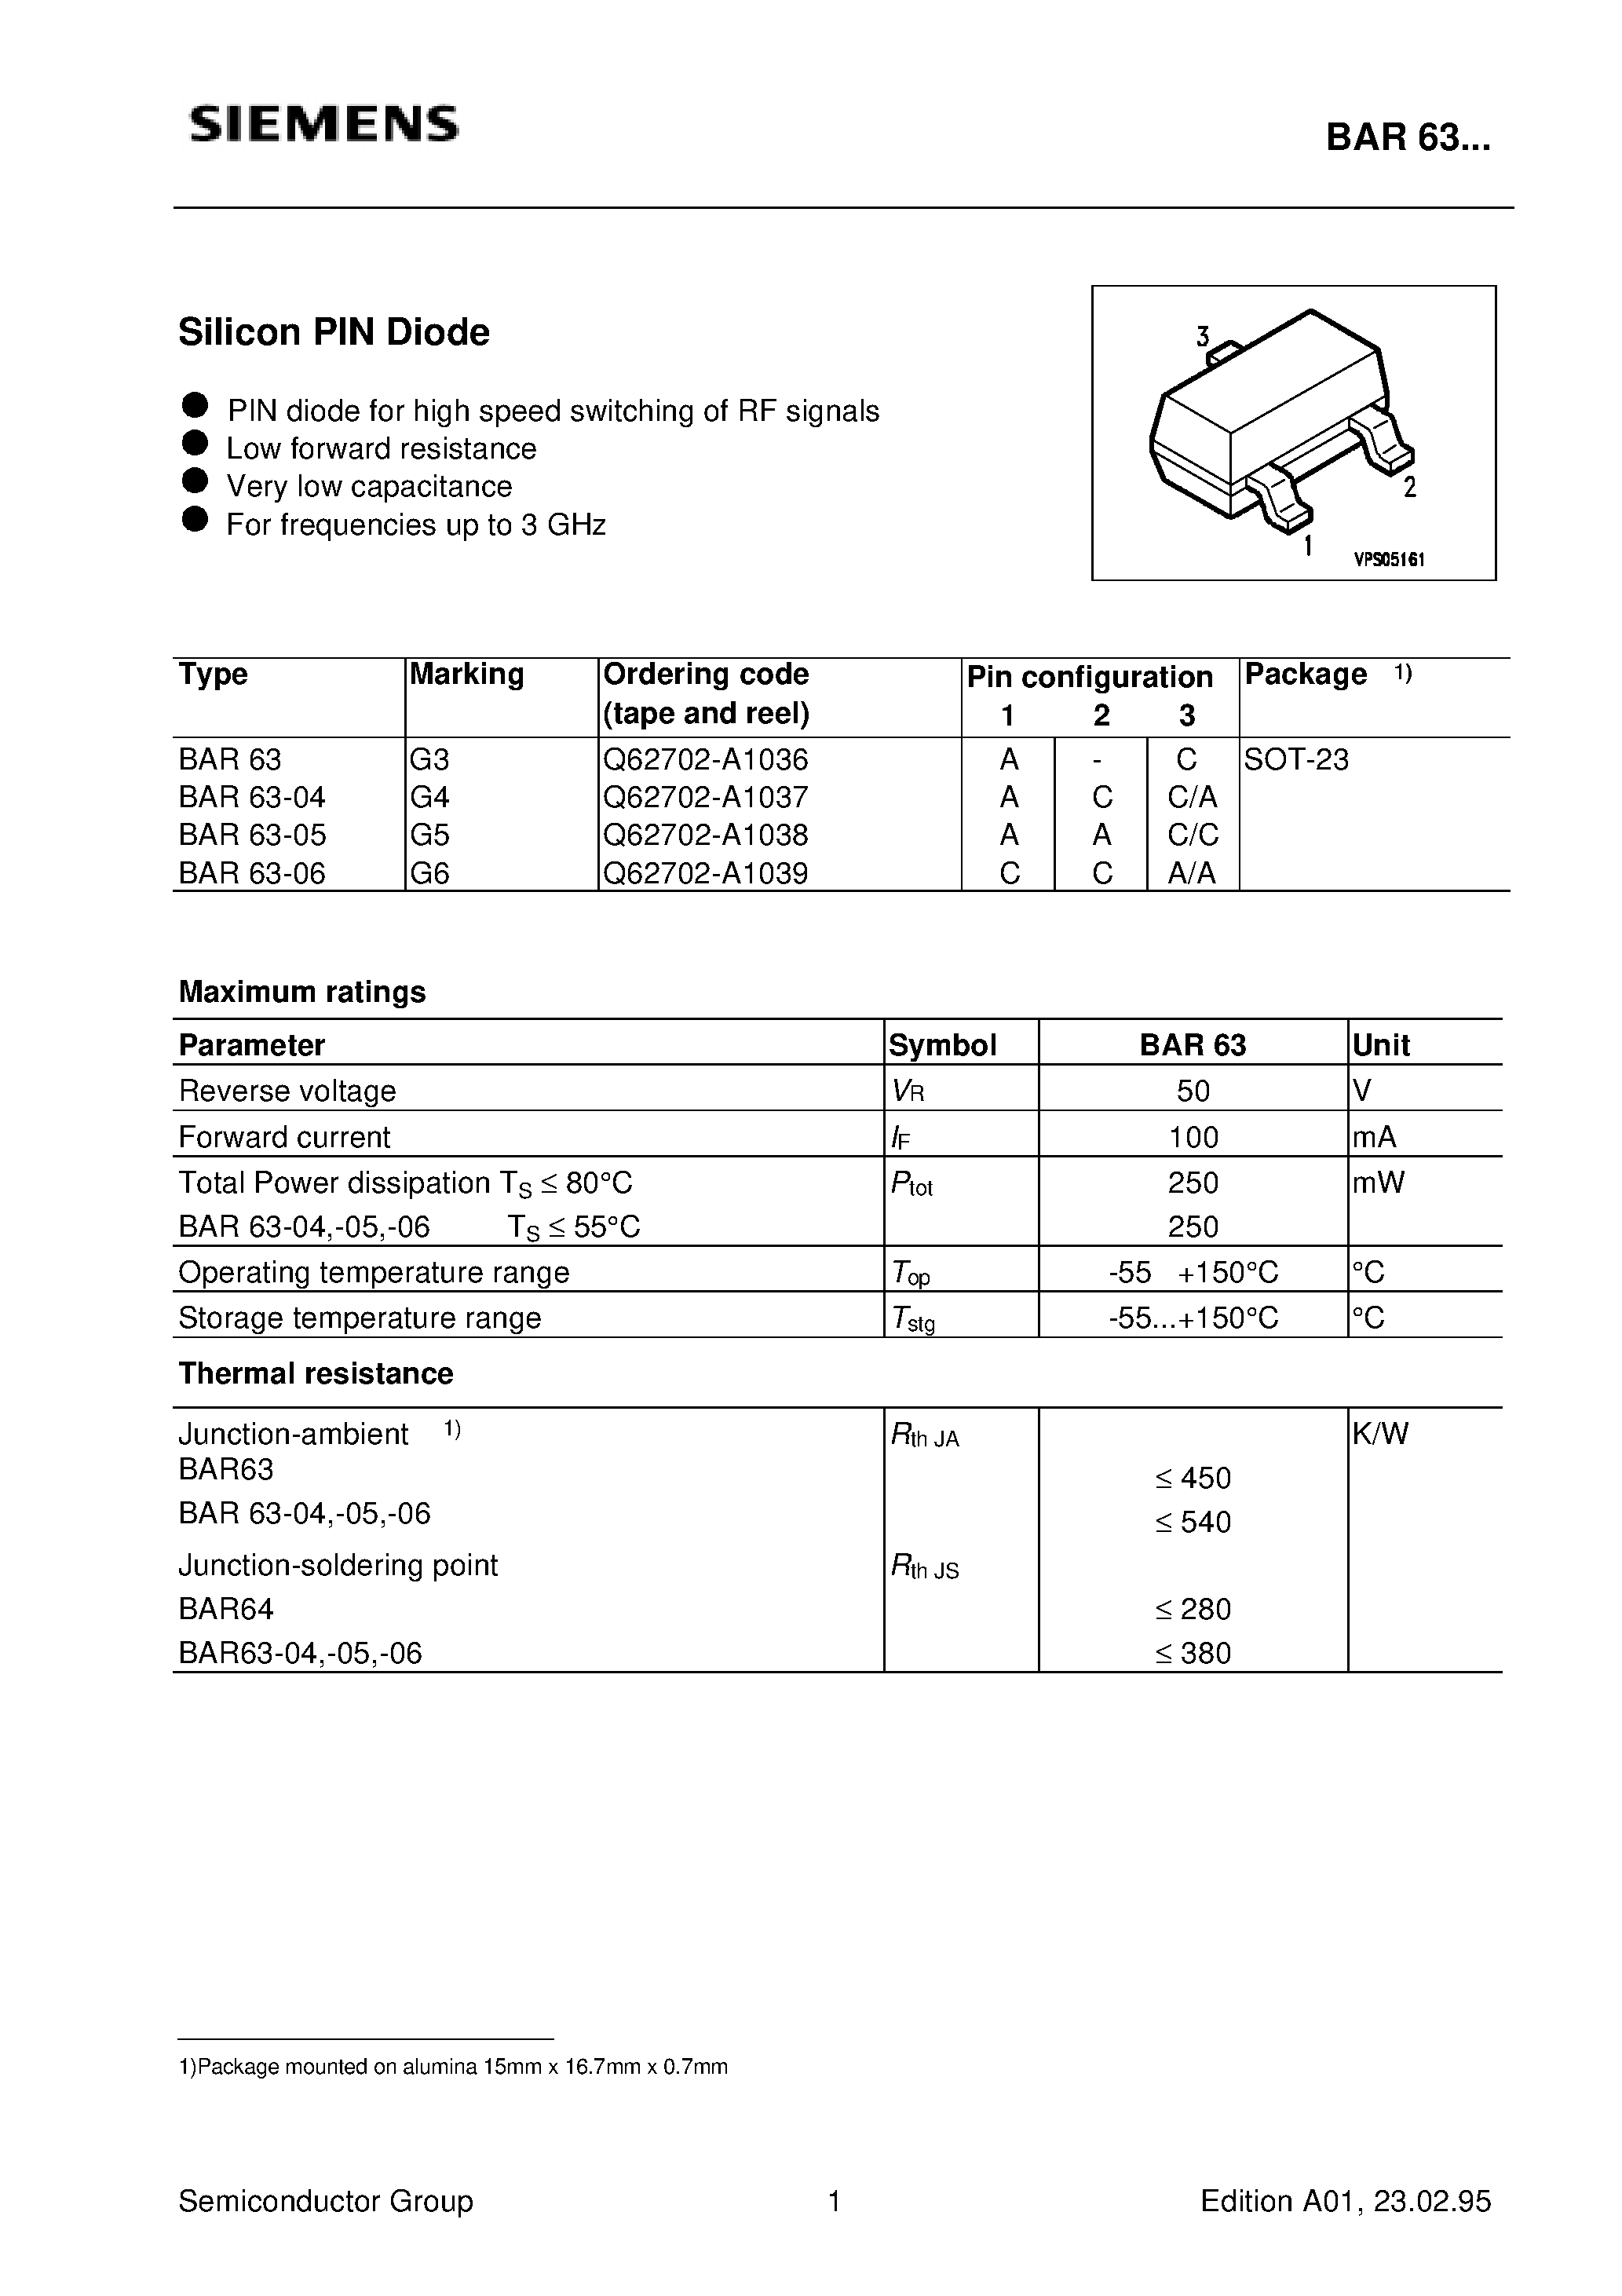 Datasheet BAR63 - Silicon PIN Diode (PIN diode for high speed switching of RF signals Low forward resistance Very low capacitance For frequencies up to 3 GHz) page 1